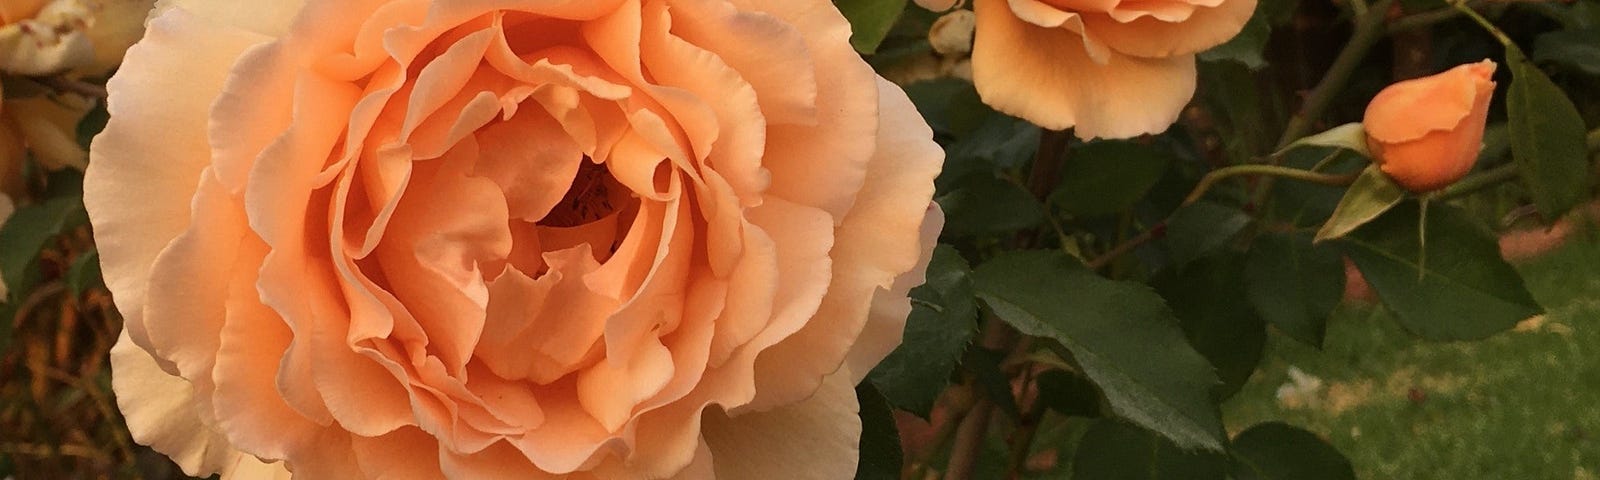 A close-up of large apricot-coloured roses